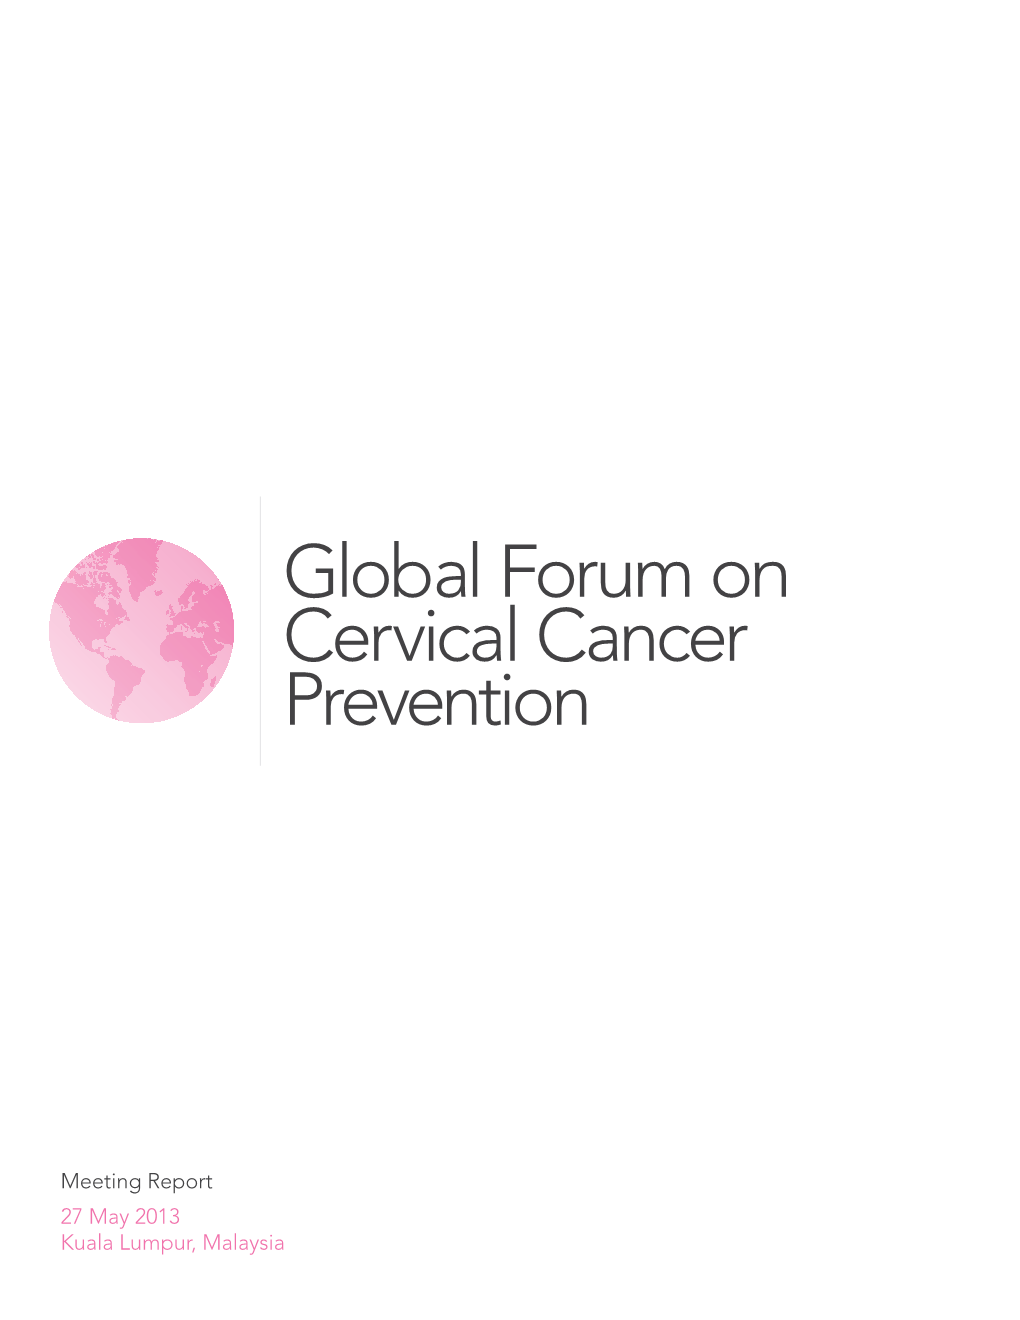 Global Forum on Cervical Cancer Prevention in Kuala Lumpur, Malaysia